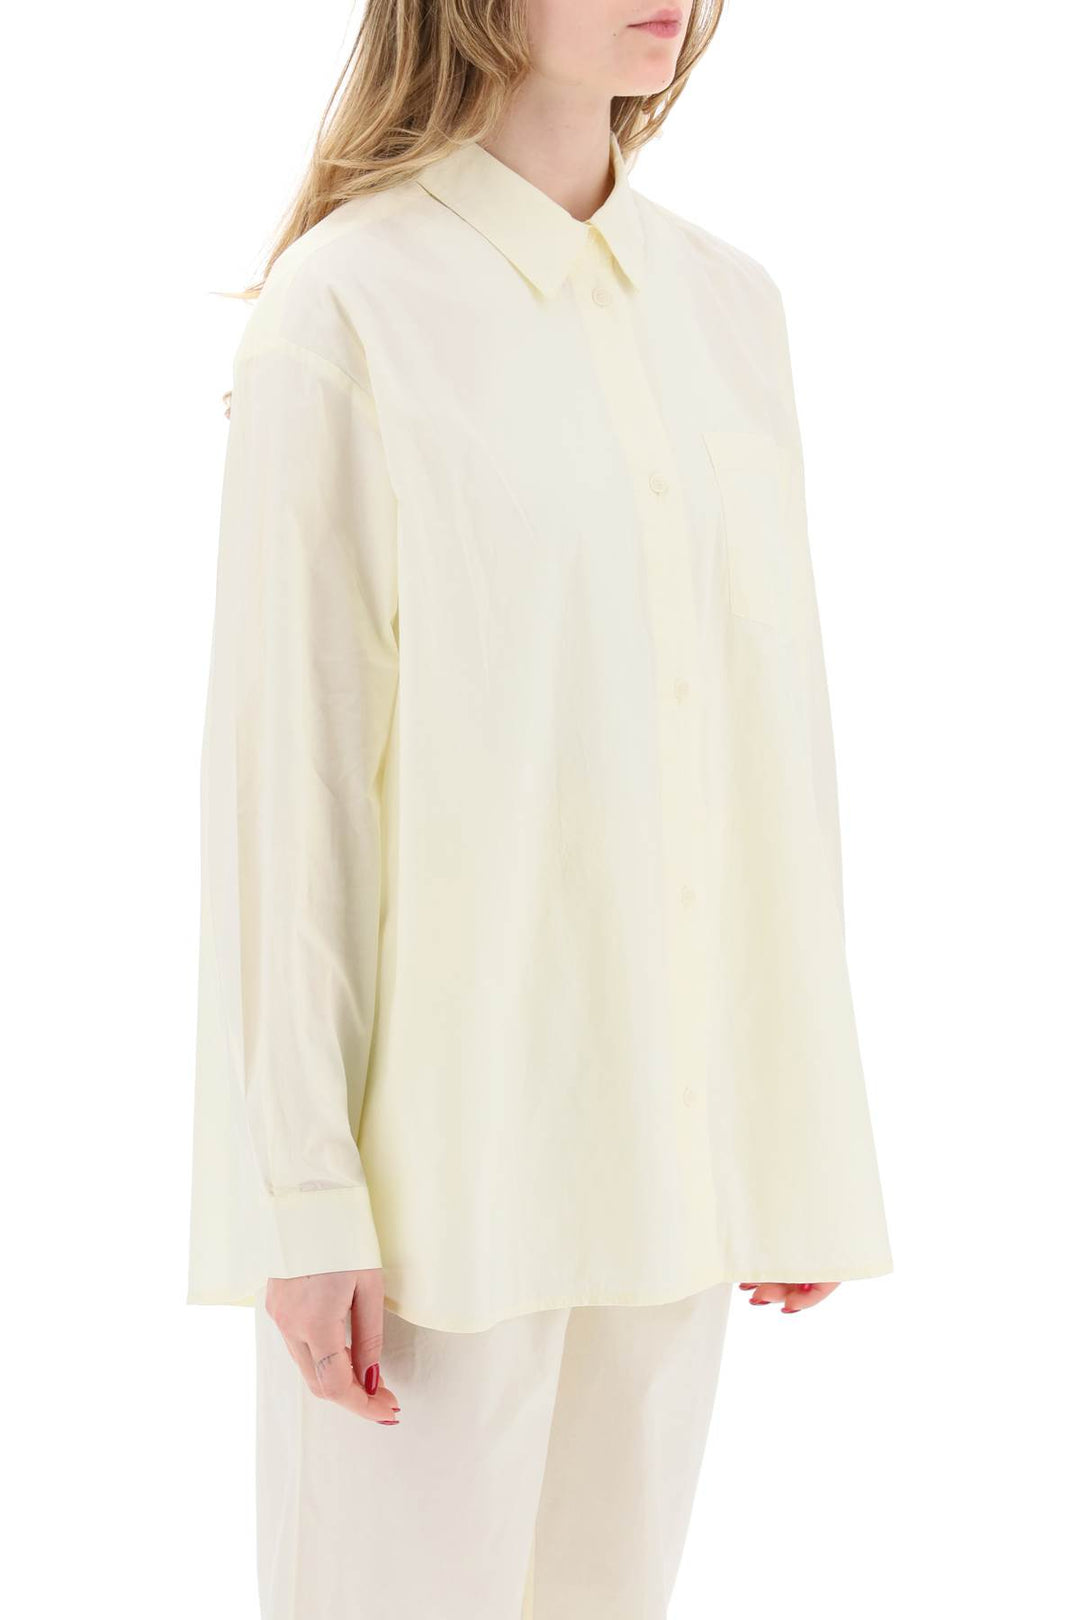 Skall Studio Replace With Double Quoteoversized Organic Cotton Edgar Shirt   Giallo